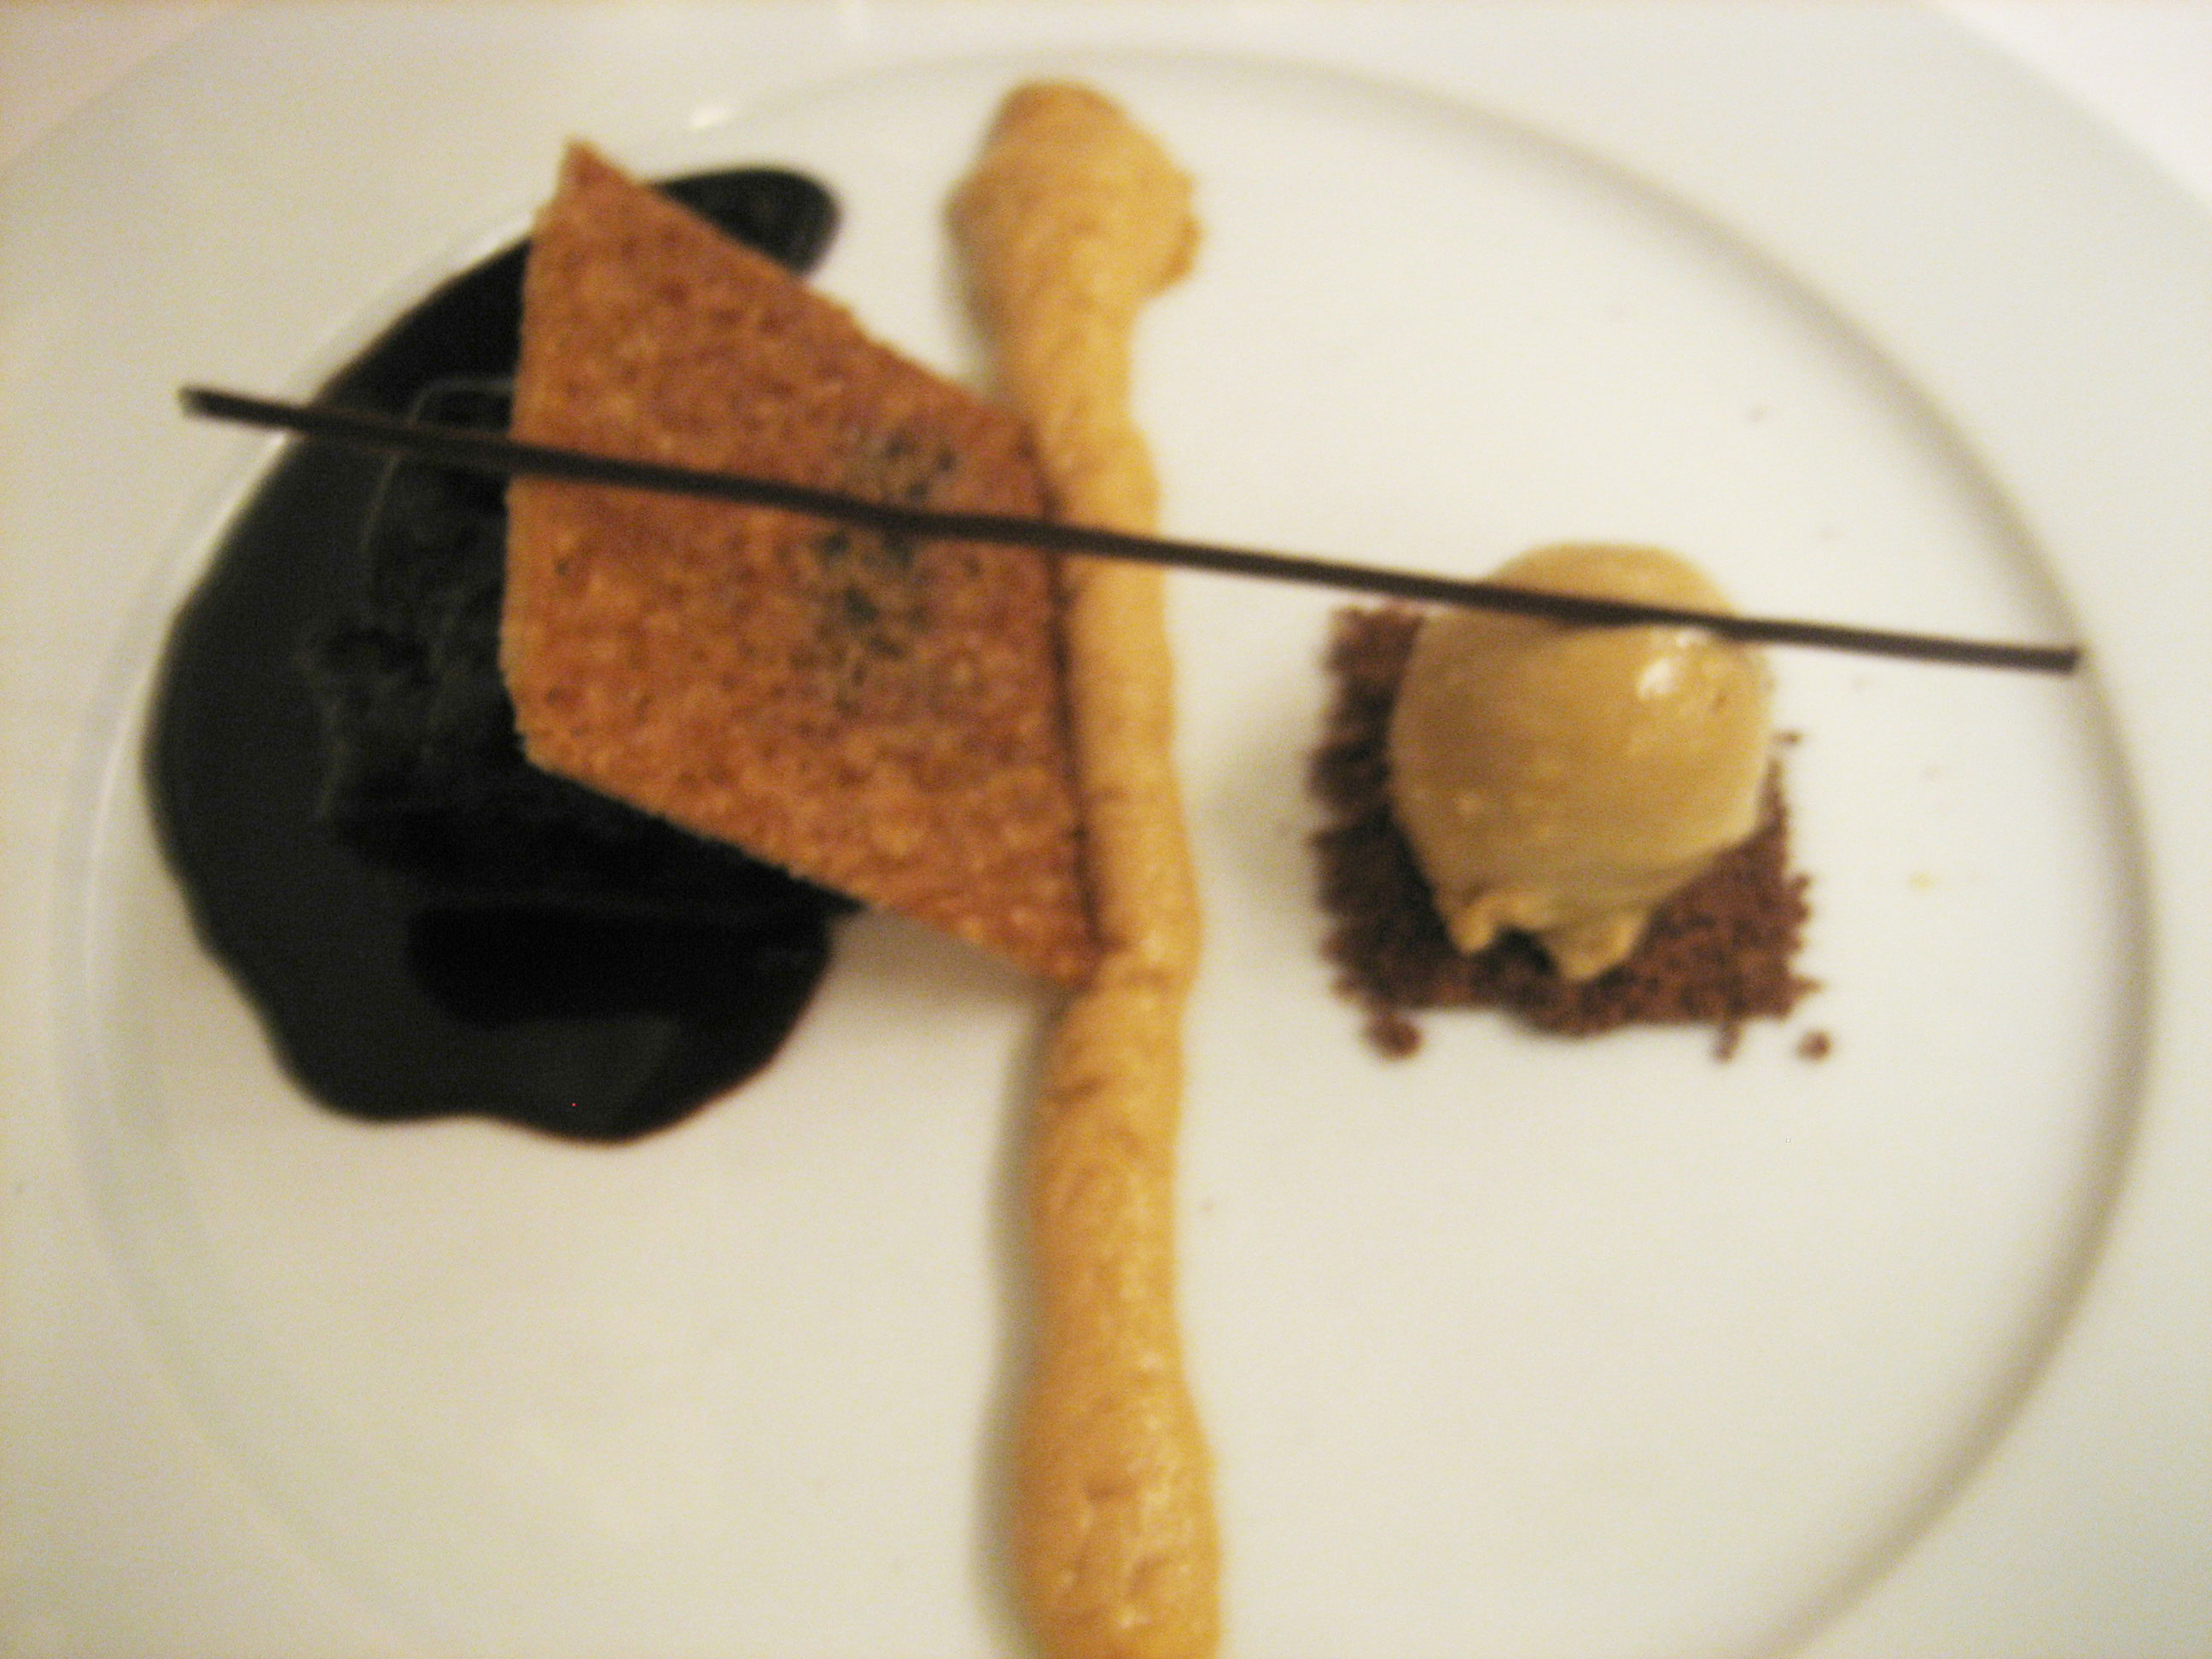 Sticky toffee cake in dark chocolate ganache, oatmeal stout ice cream in a patch of crunchies